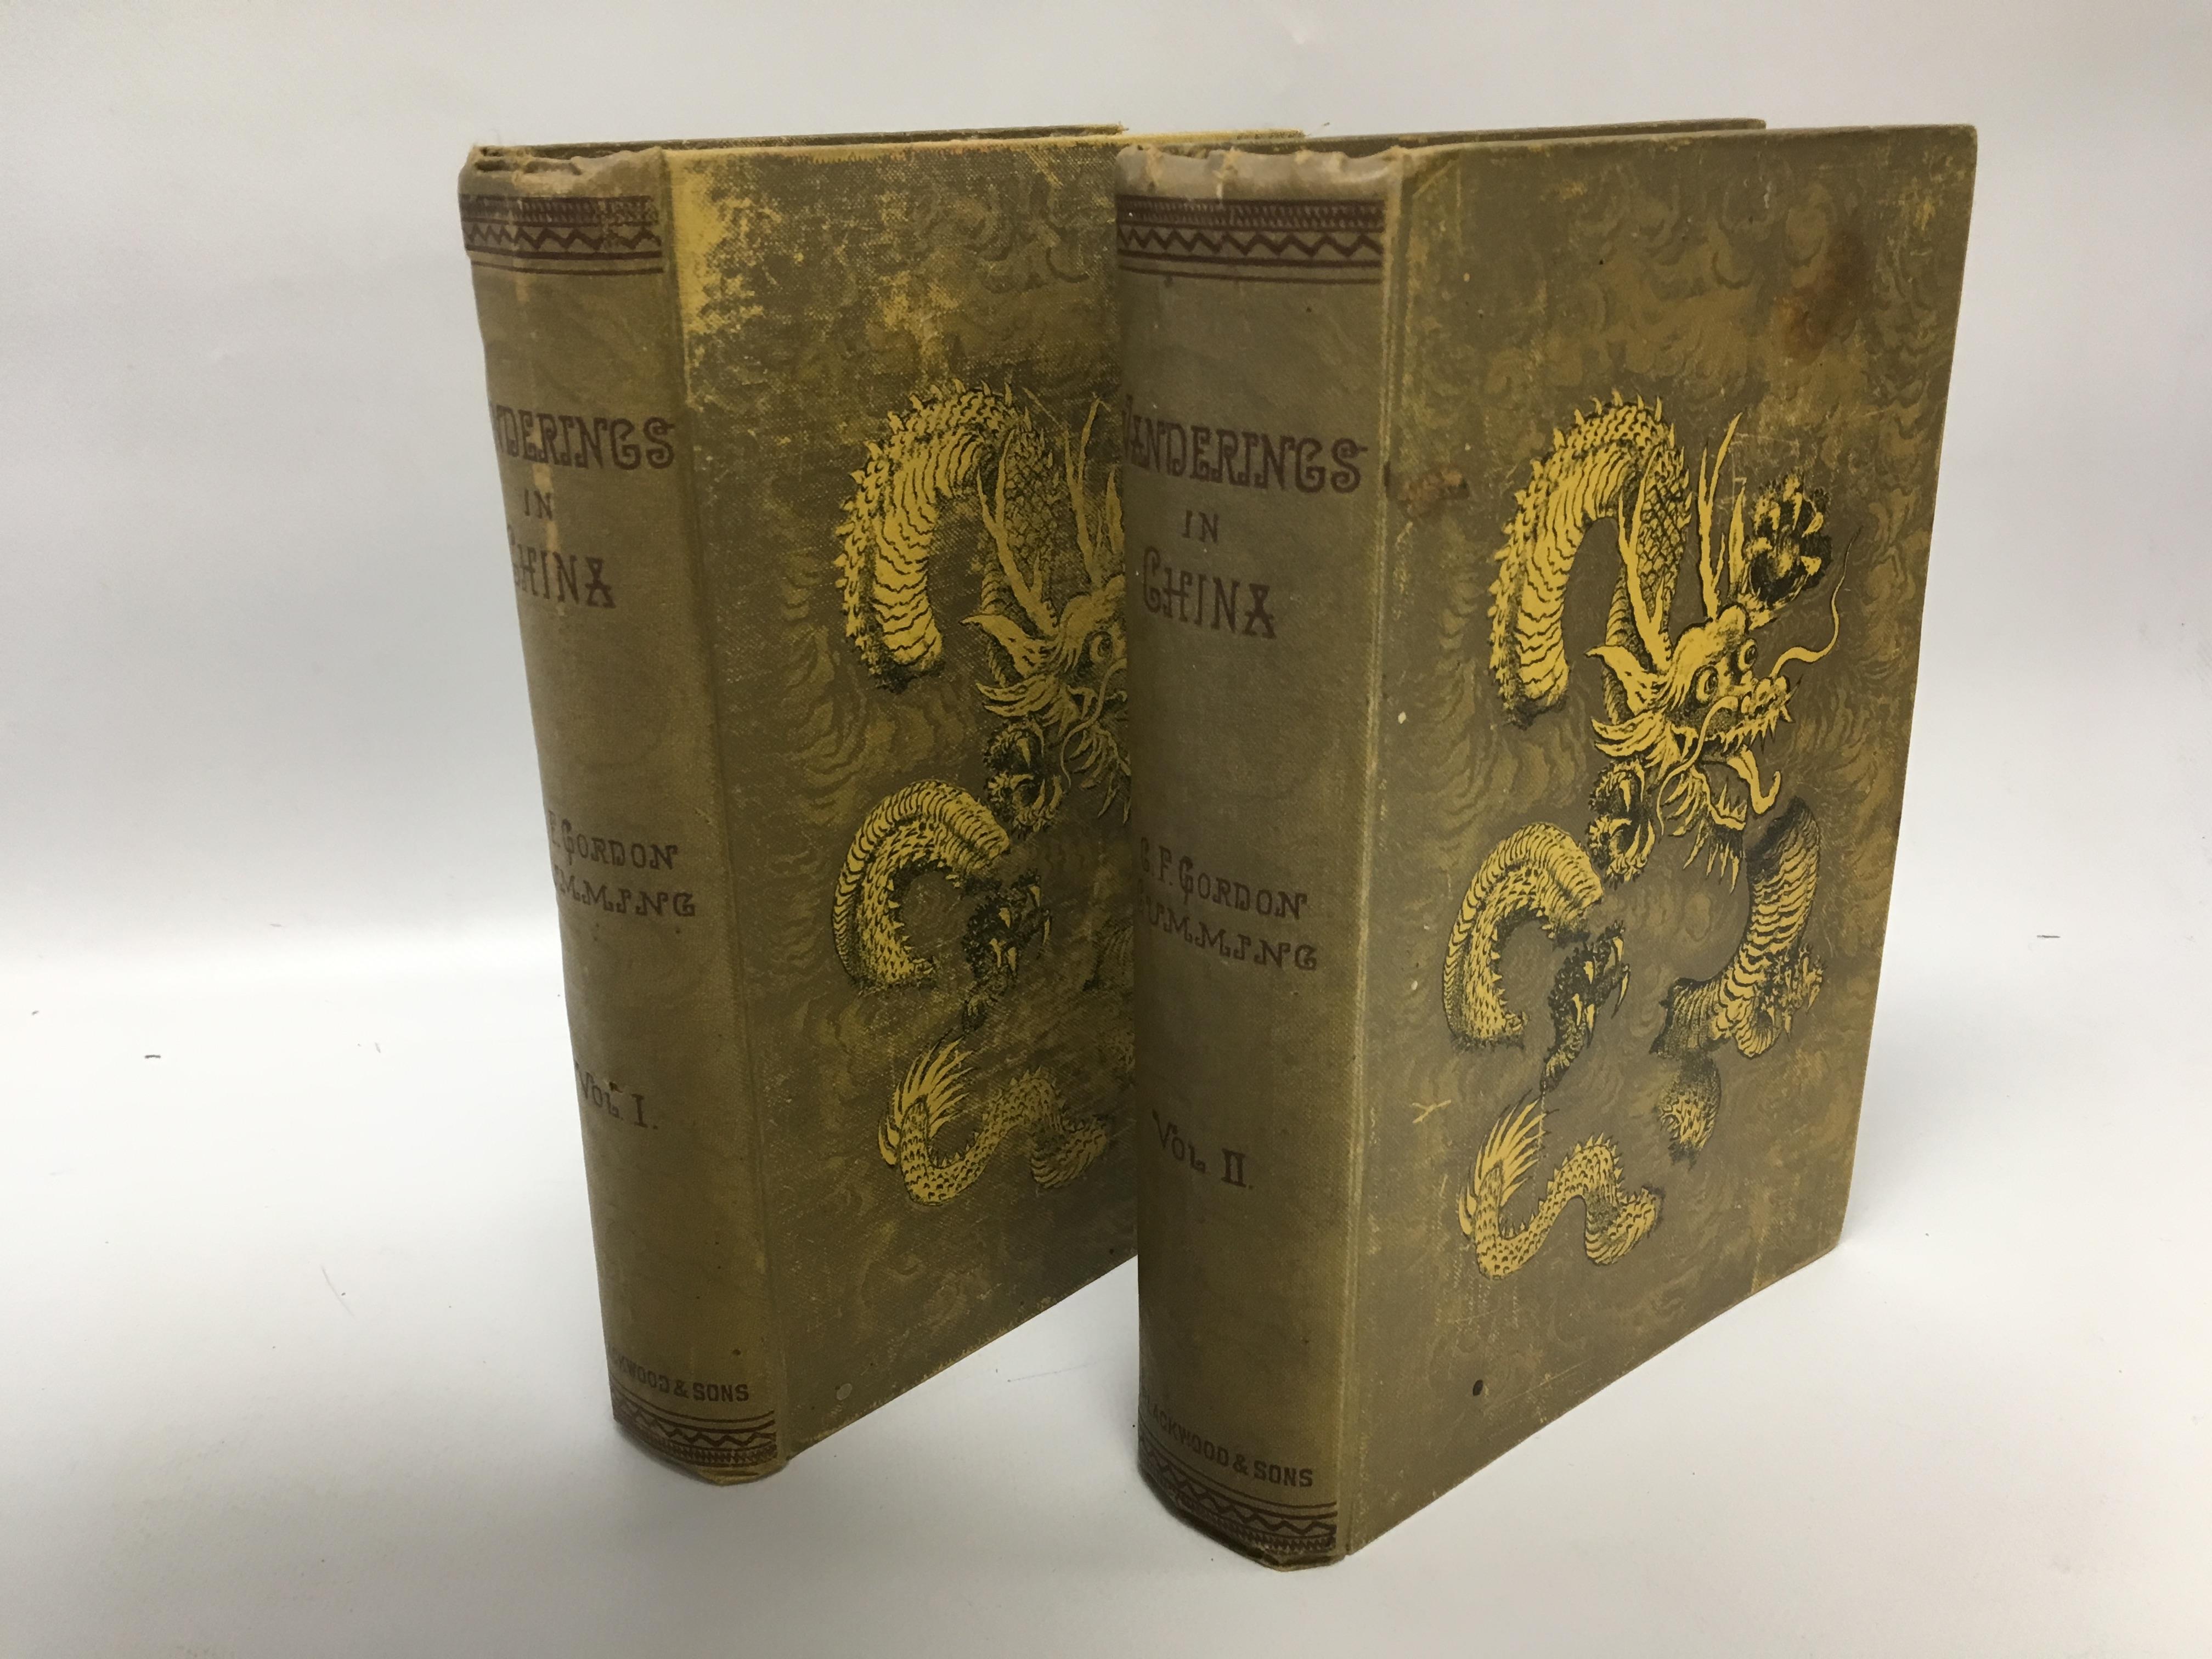 Cummings (Constance F) Wanderings in China. 2 Vols New edition.